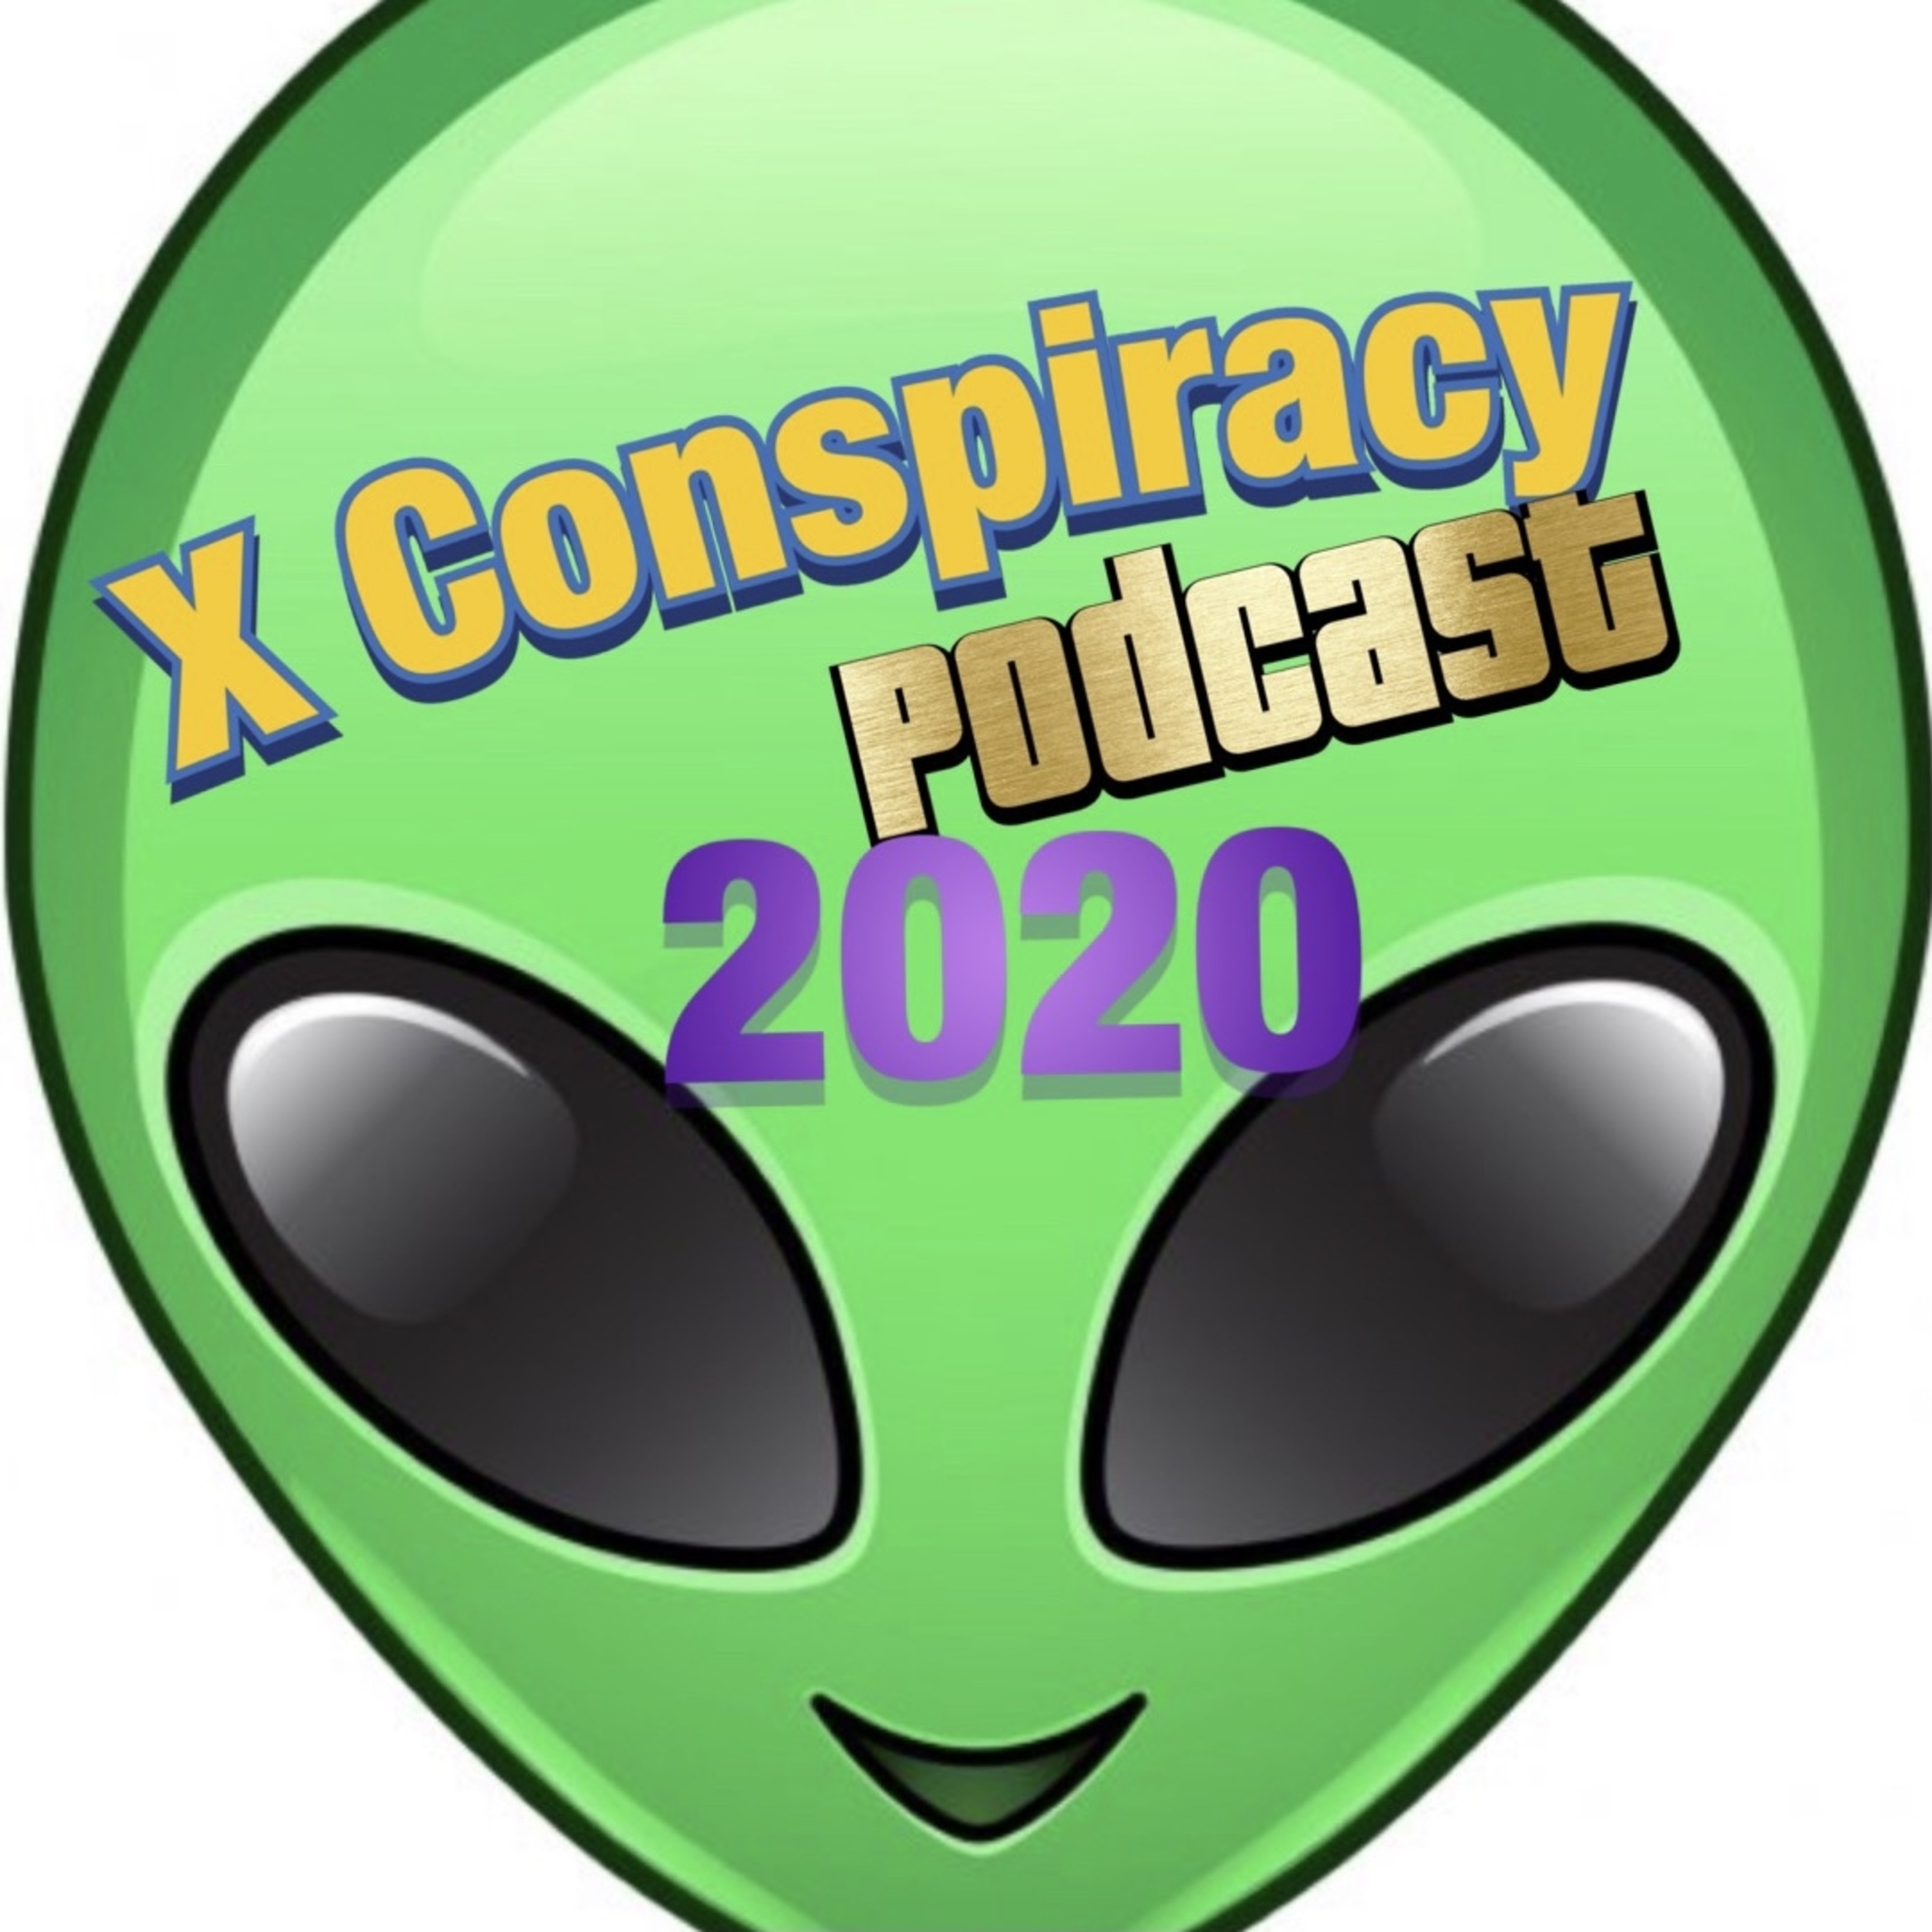 E1 X Conspiracy - How many conspiracy theories are there our there?